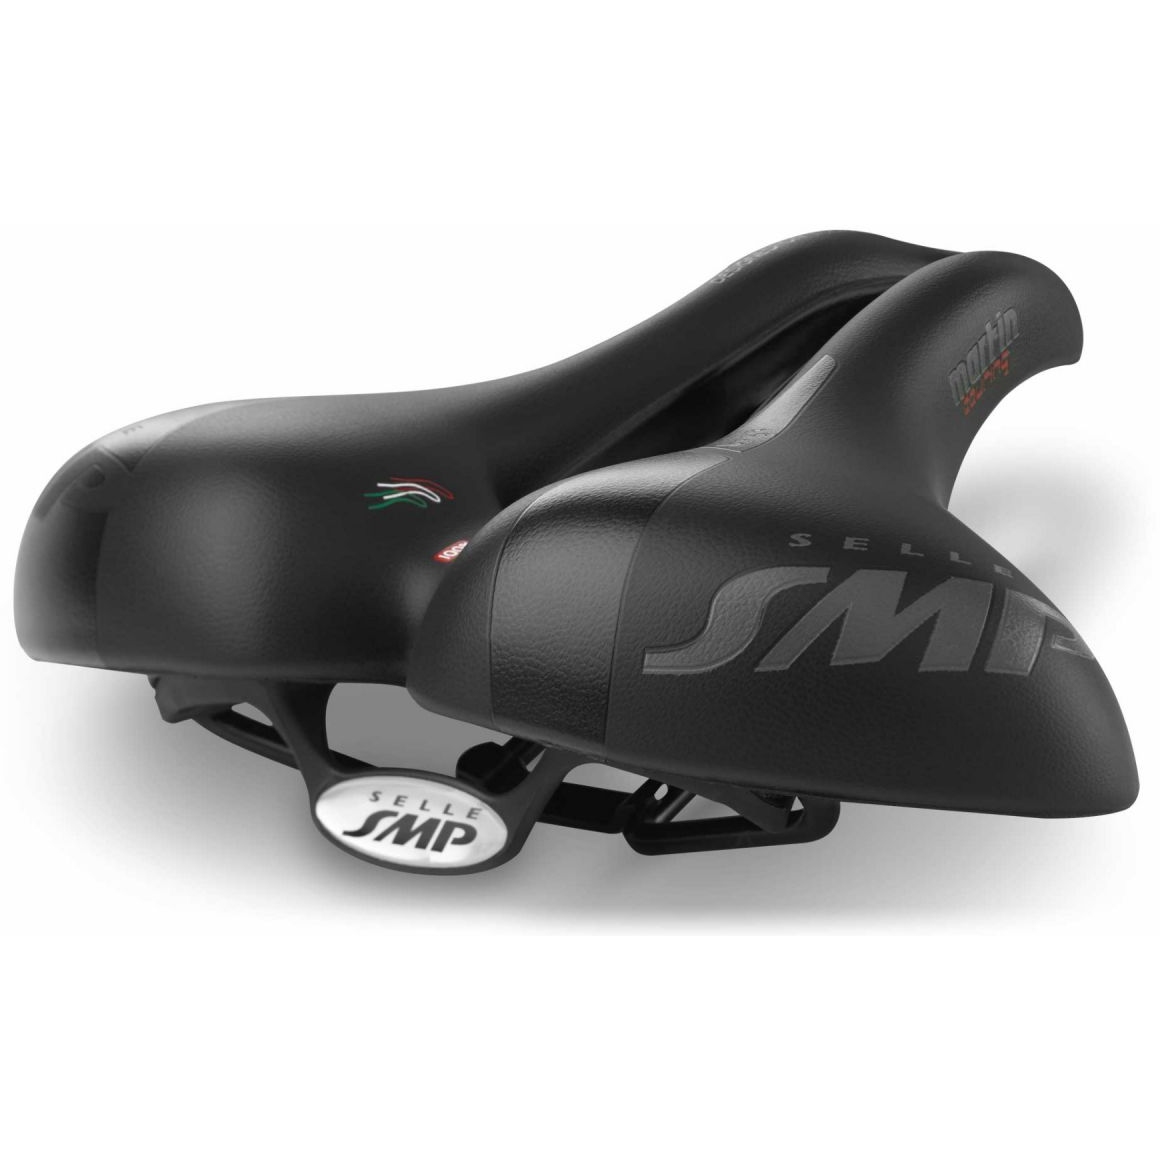 Picture of Selle SMP Martin Touring Large Saddle - black